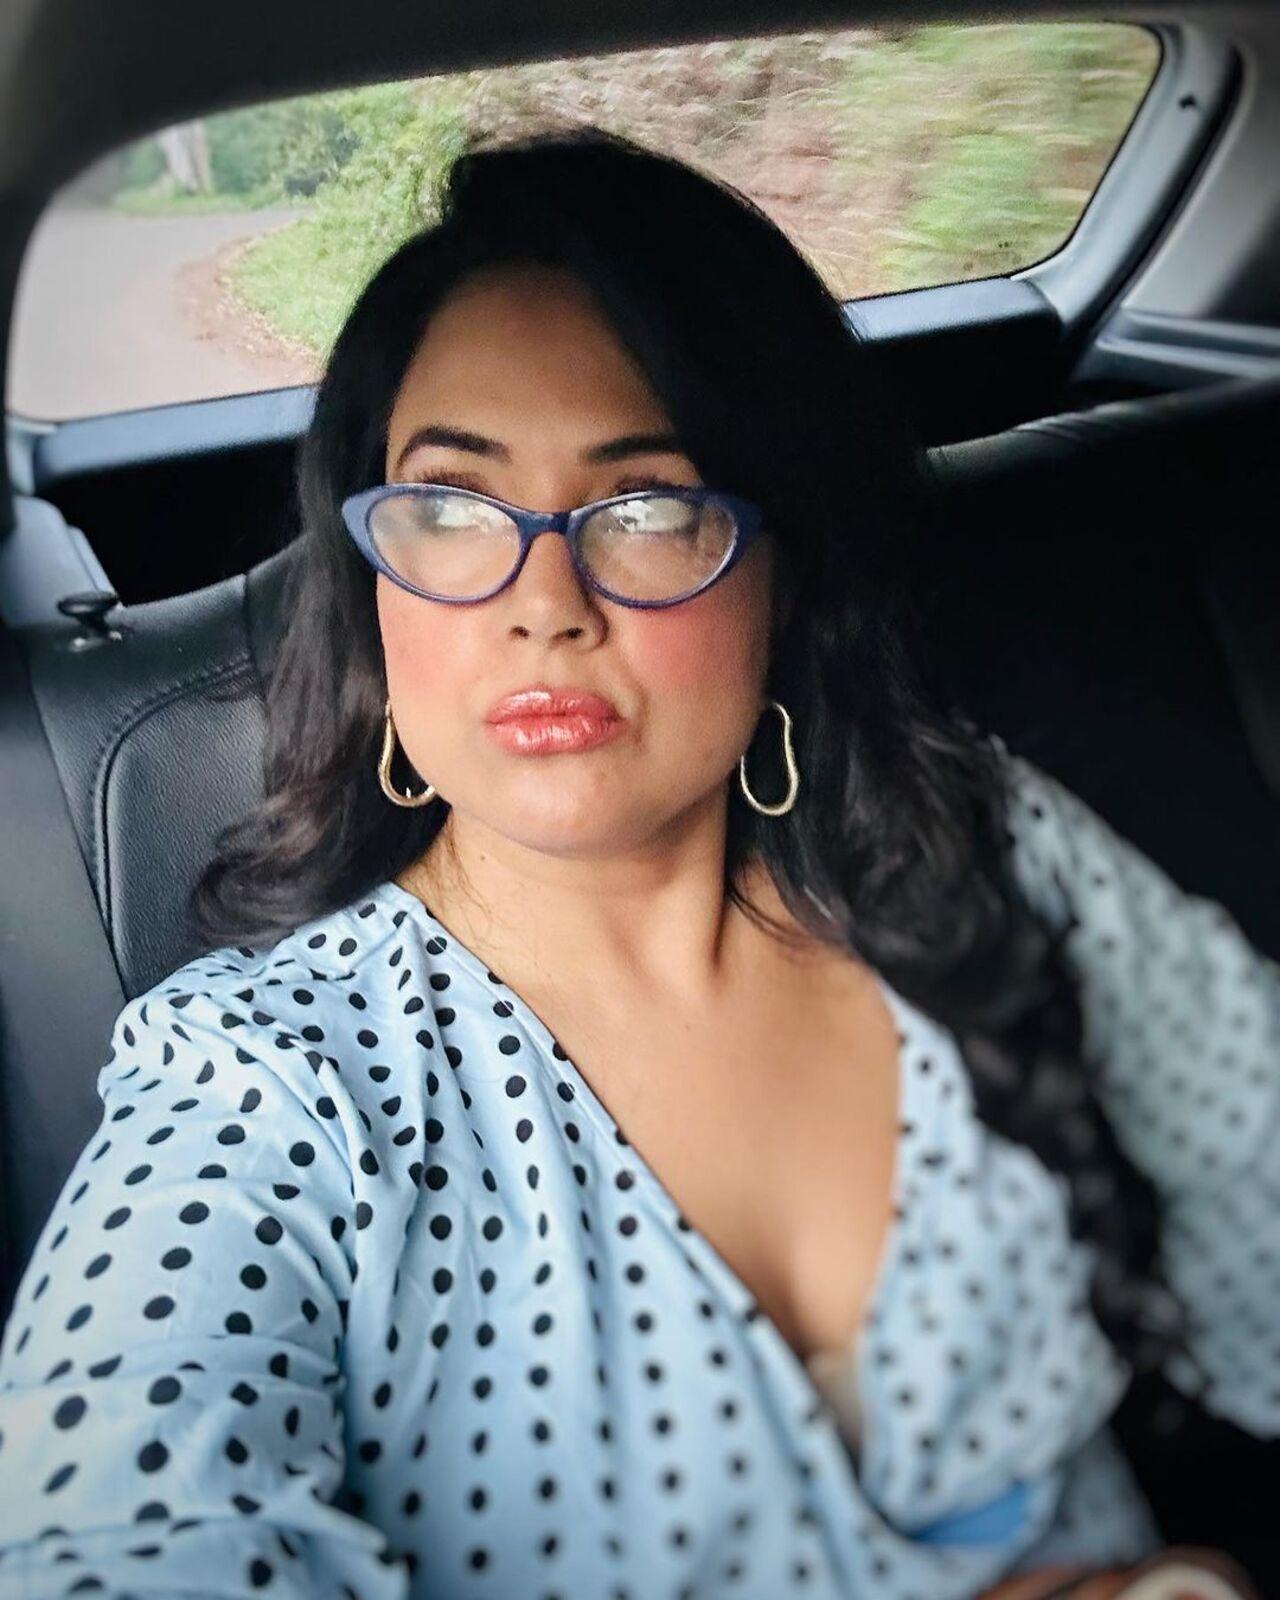 Today, a mother of two, Sameera uses social media to champion body positivity and openly addresses topics that people on social media usually shy away from. From flaunting her flabs to showing her grey hair, Sameera's social media handle is a welcome space from the otherwise pretentious virtual world